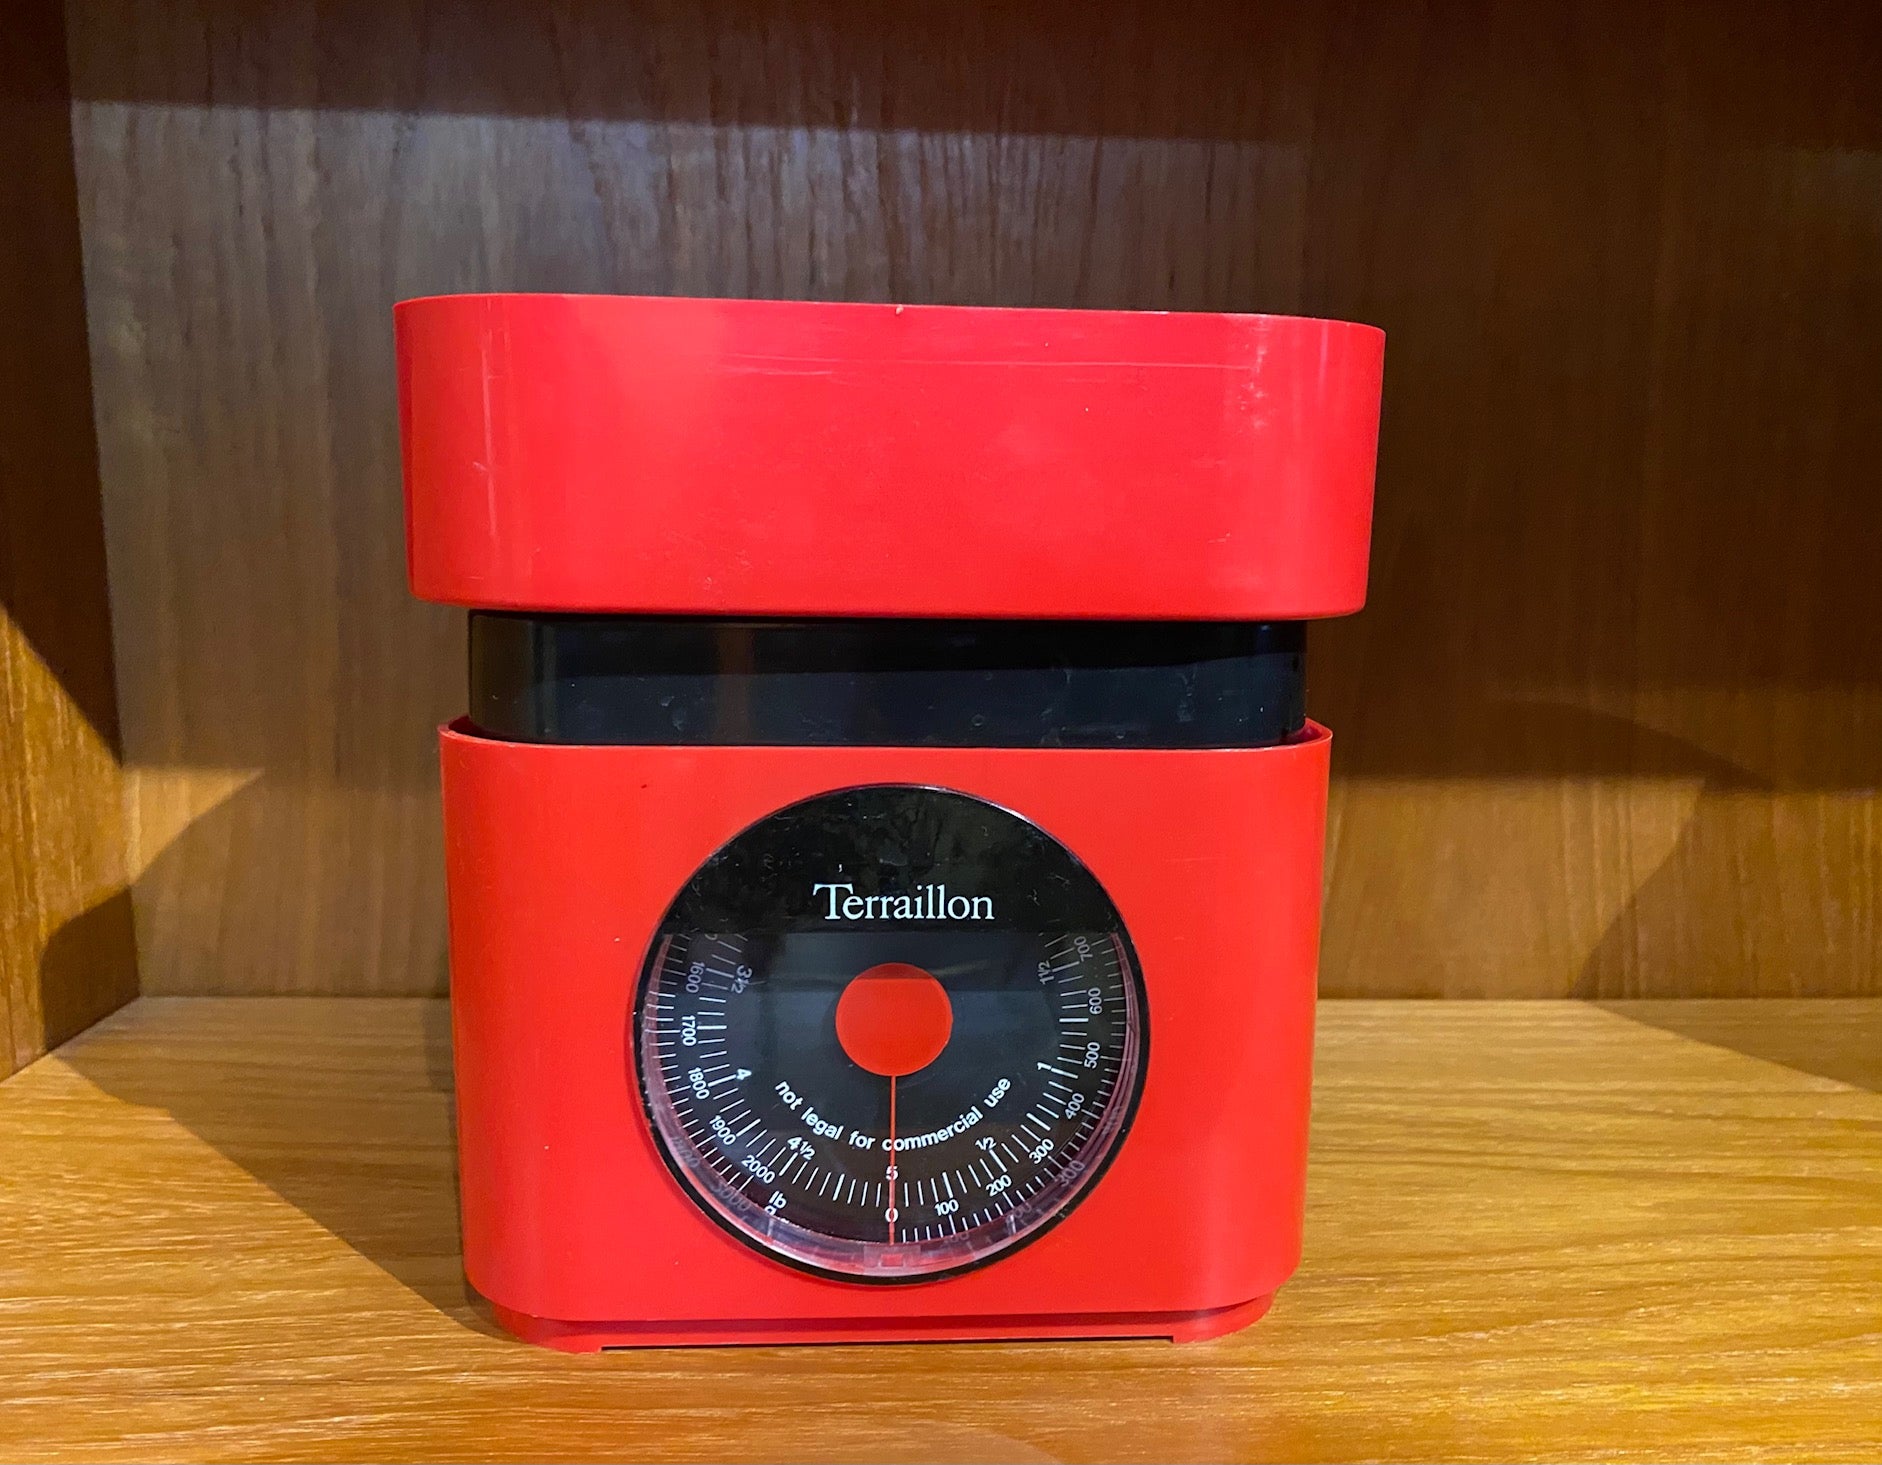 Vintage fire engine red kitchen scale originally designed by Marco Zanuso for Terraillon. Made in France- Cook Street Vintage.